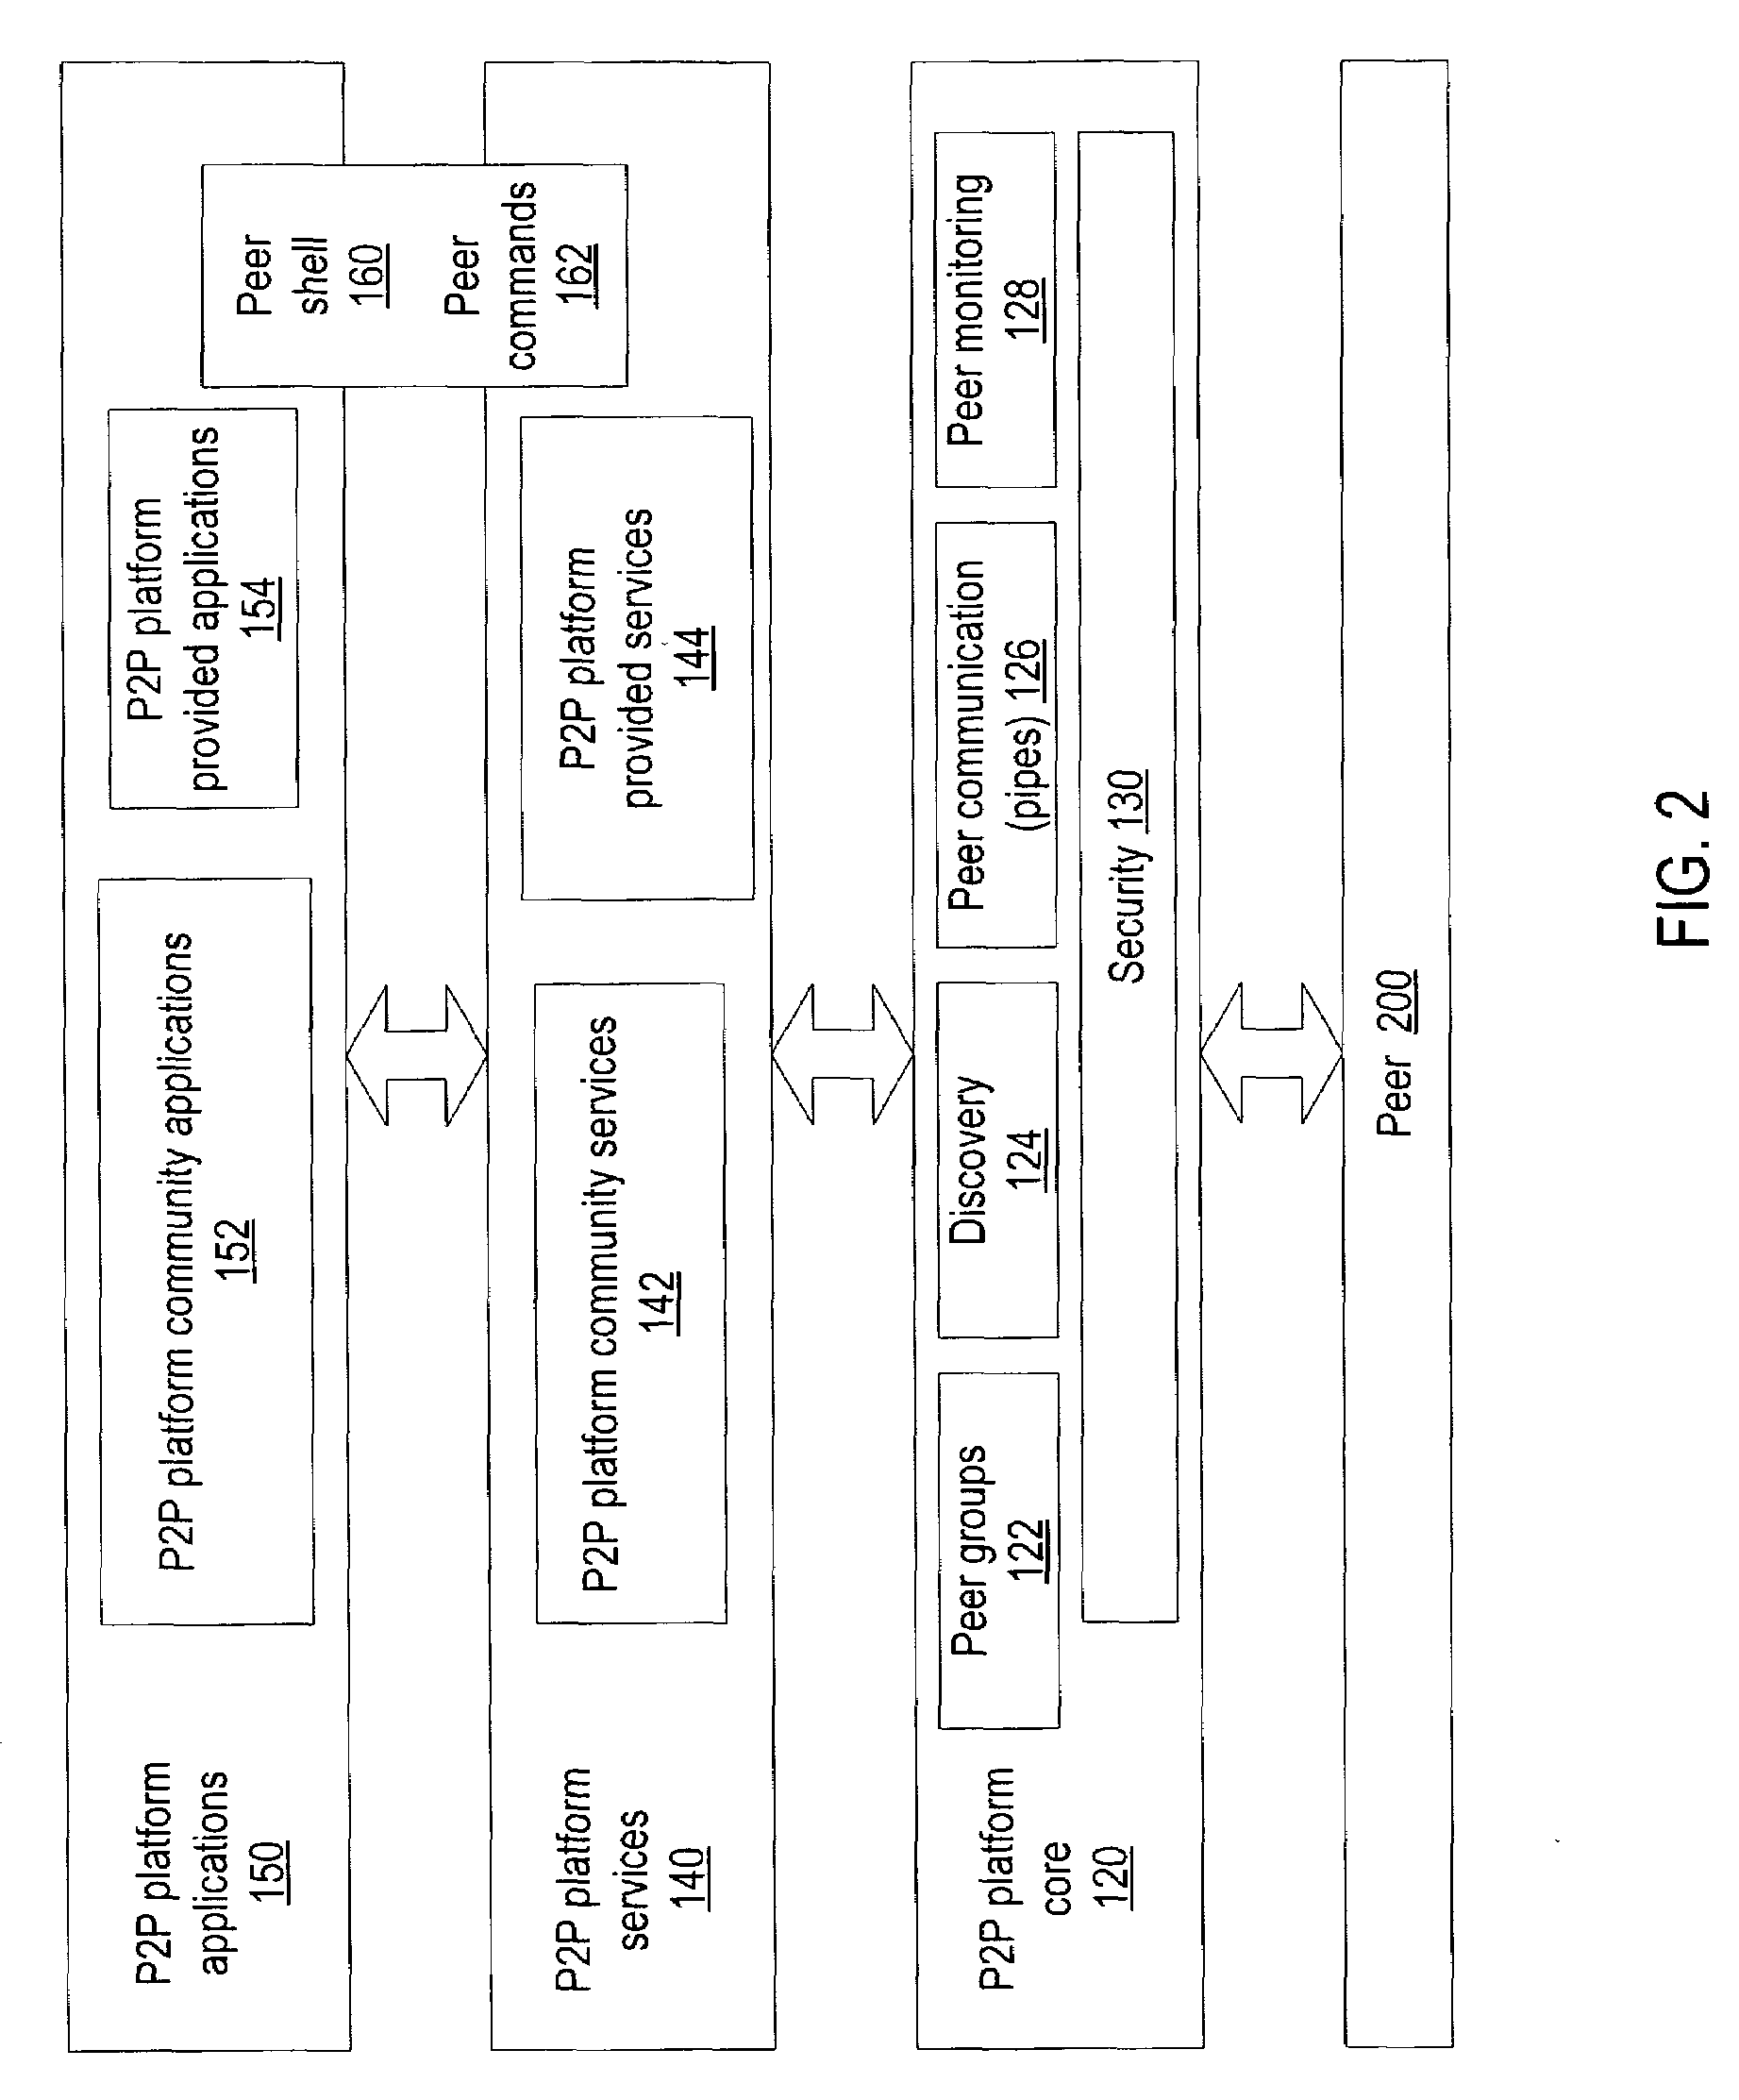 Distributed indexing of identity information in a peer-to-peer network